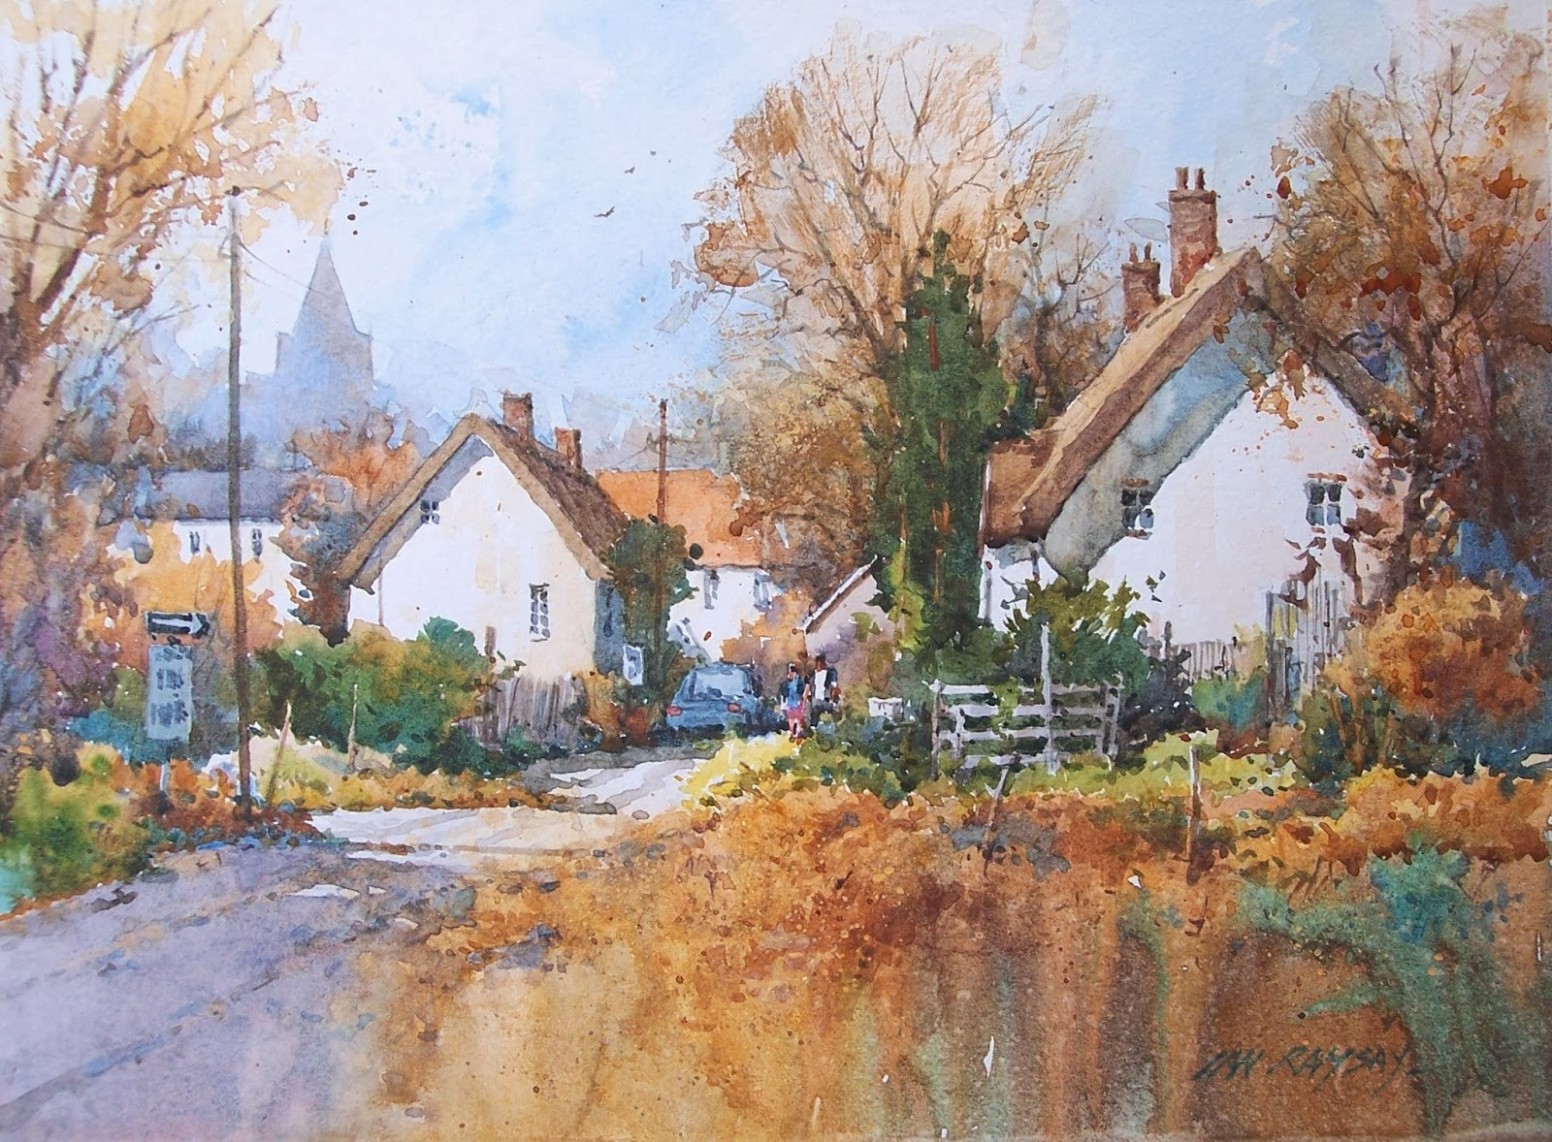 Ian Ramsay Watercolors: I Have Painted A Great Deal Over ..